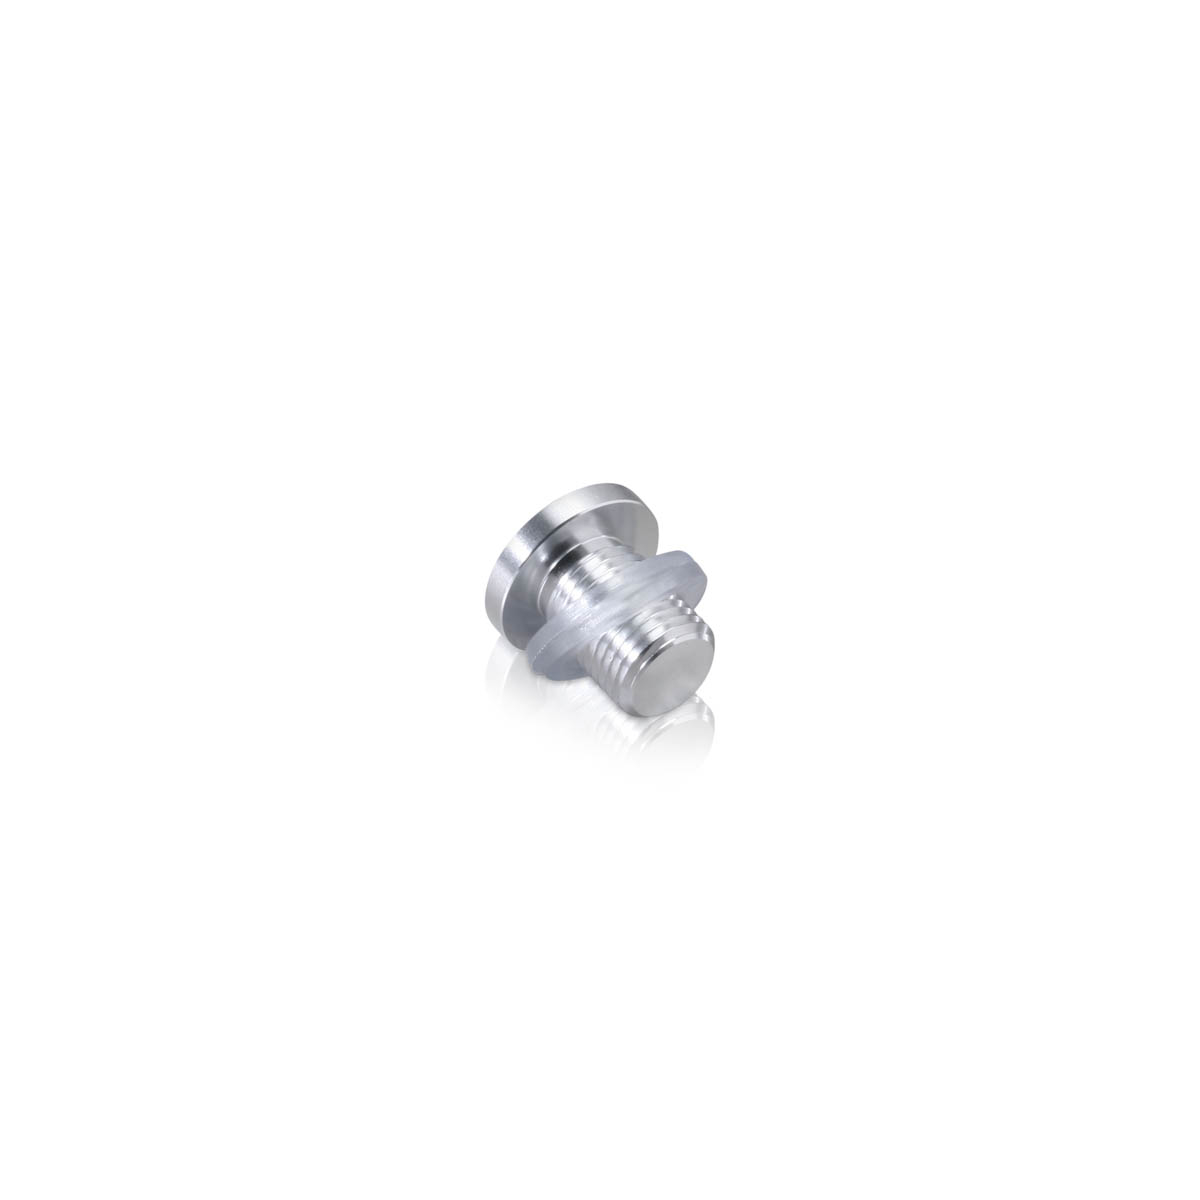 AL16-12AS Head replacement for Mbs-Standoffs 5/8'' Diameter x 1/2'' Barrel Length, Aluminum Clear Shiny Finish Standoffs (Includes 2 Silicone Washers).